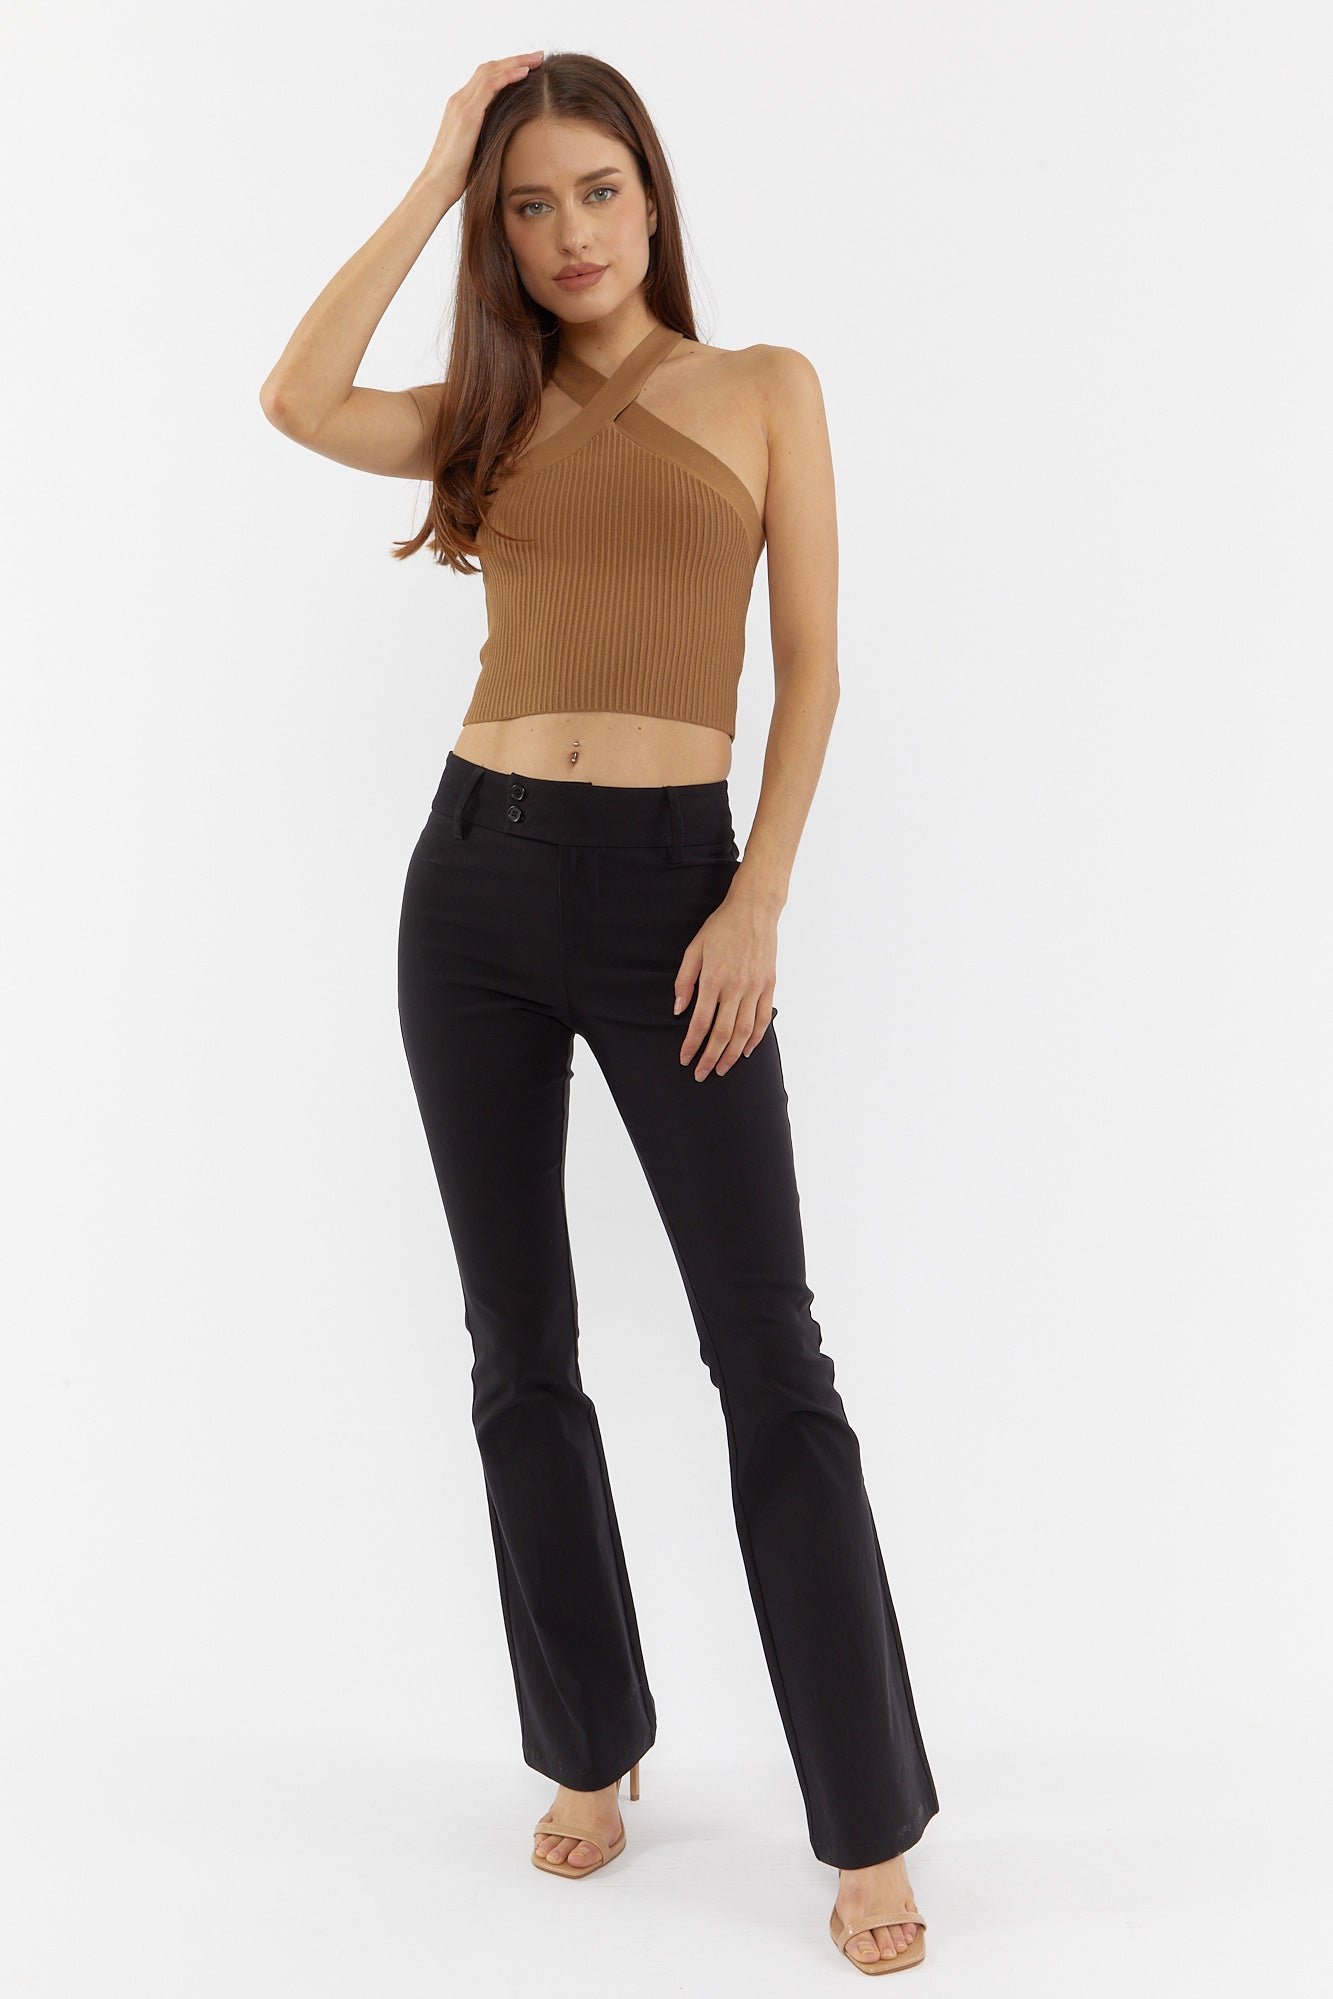 Low Rise Fit and Flare Pant – Urban Planet